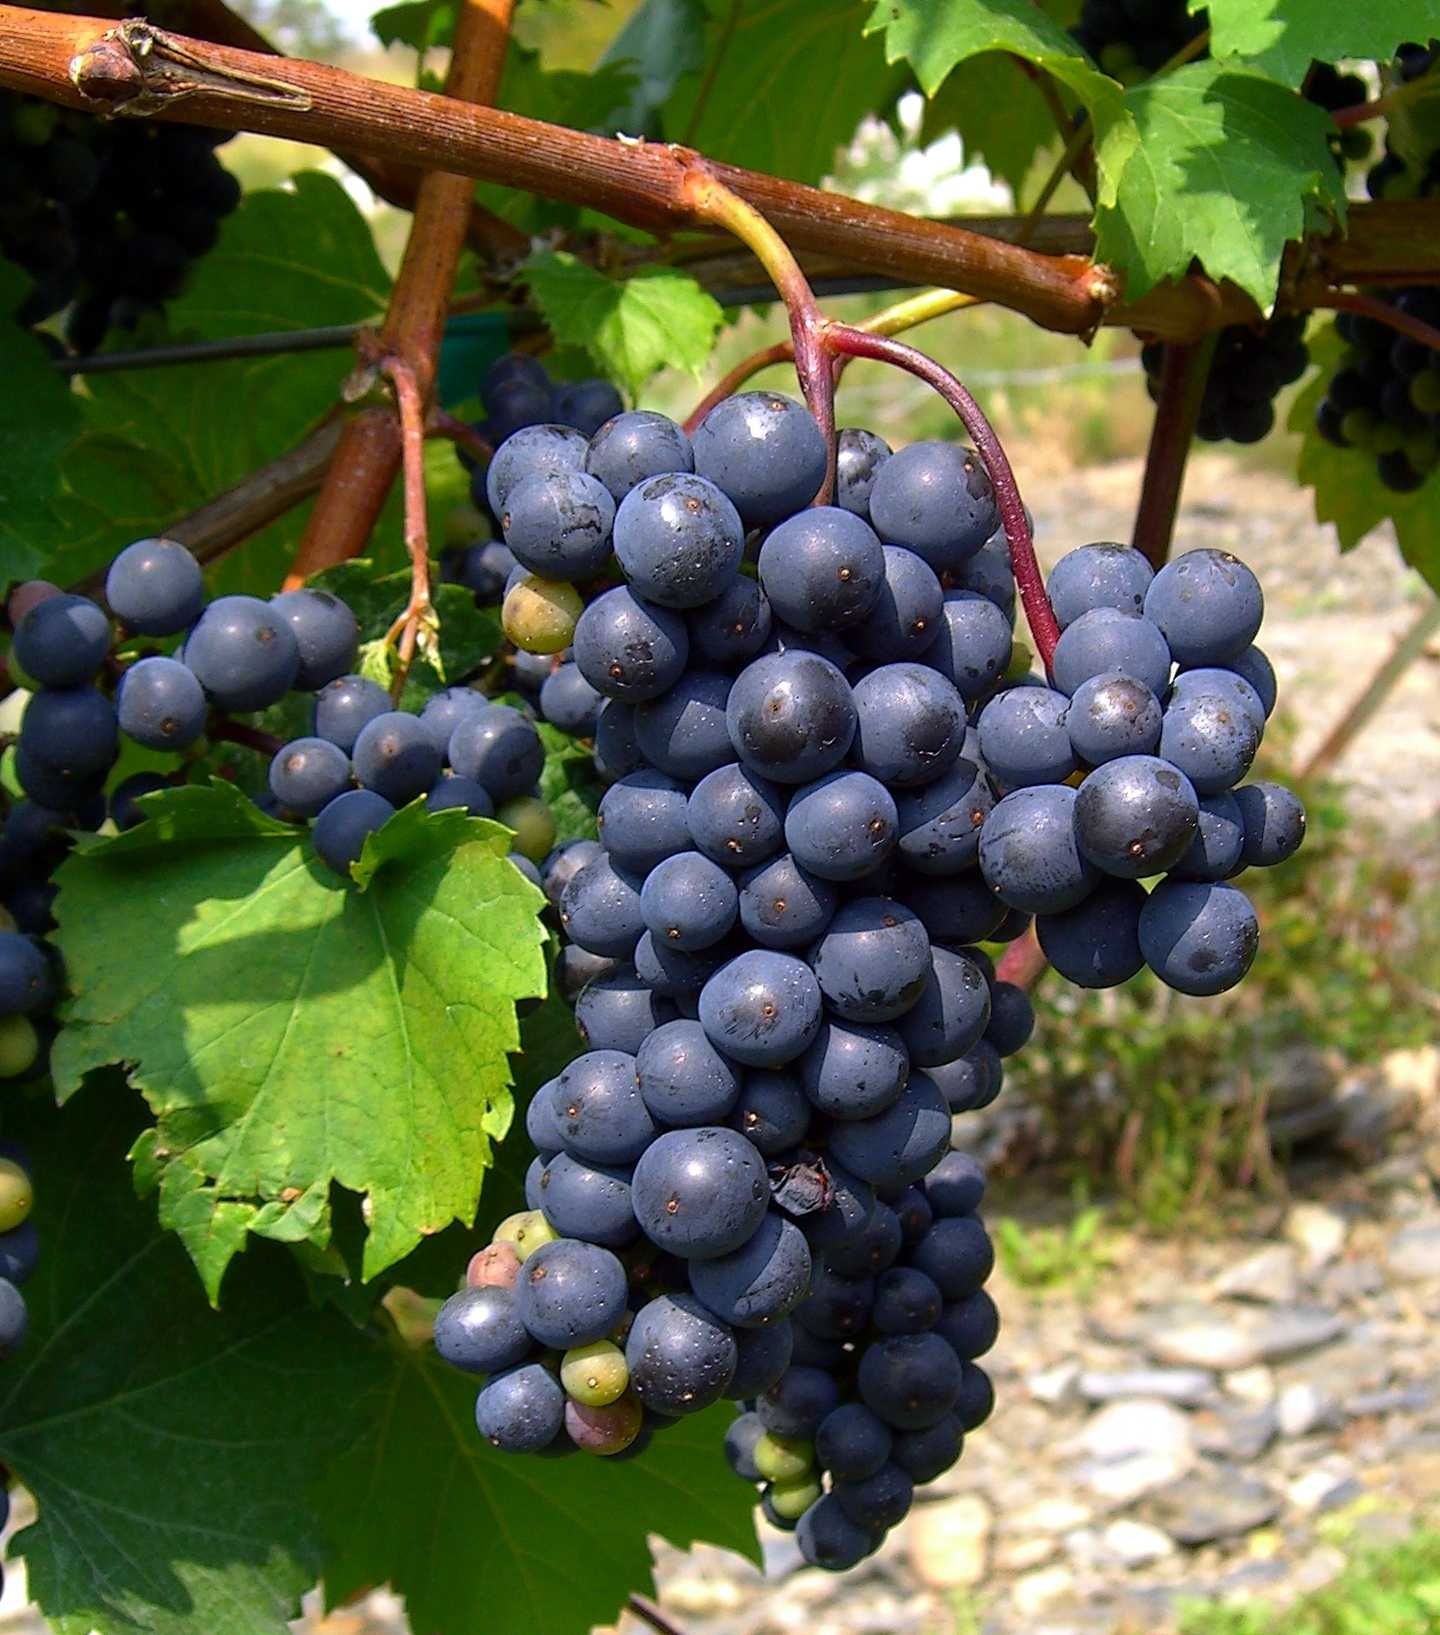 Grapes image classifcation dataset for machine learning